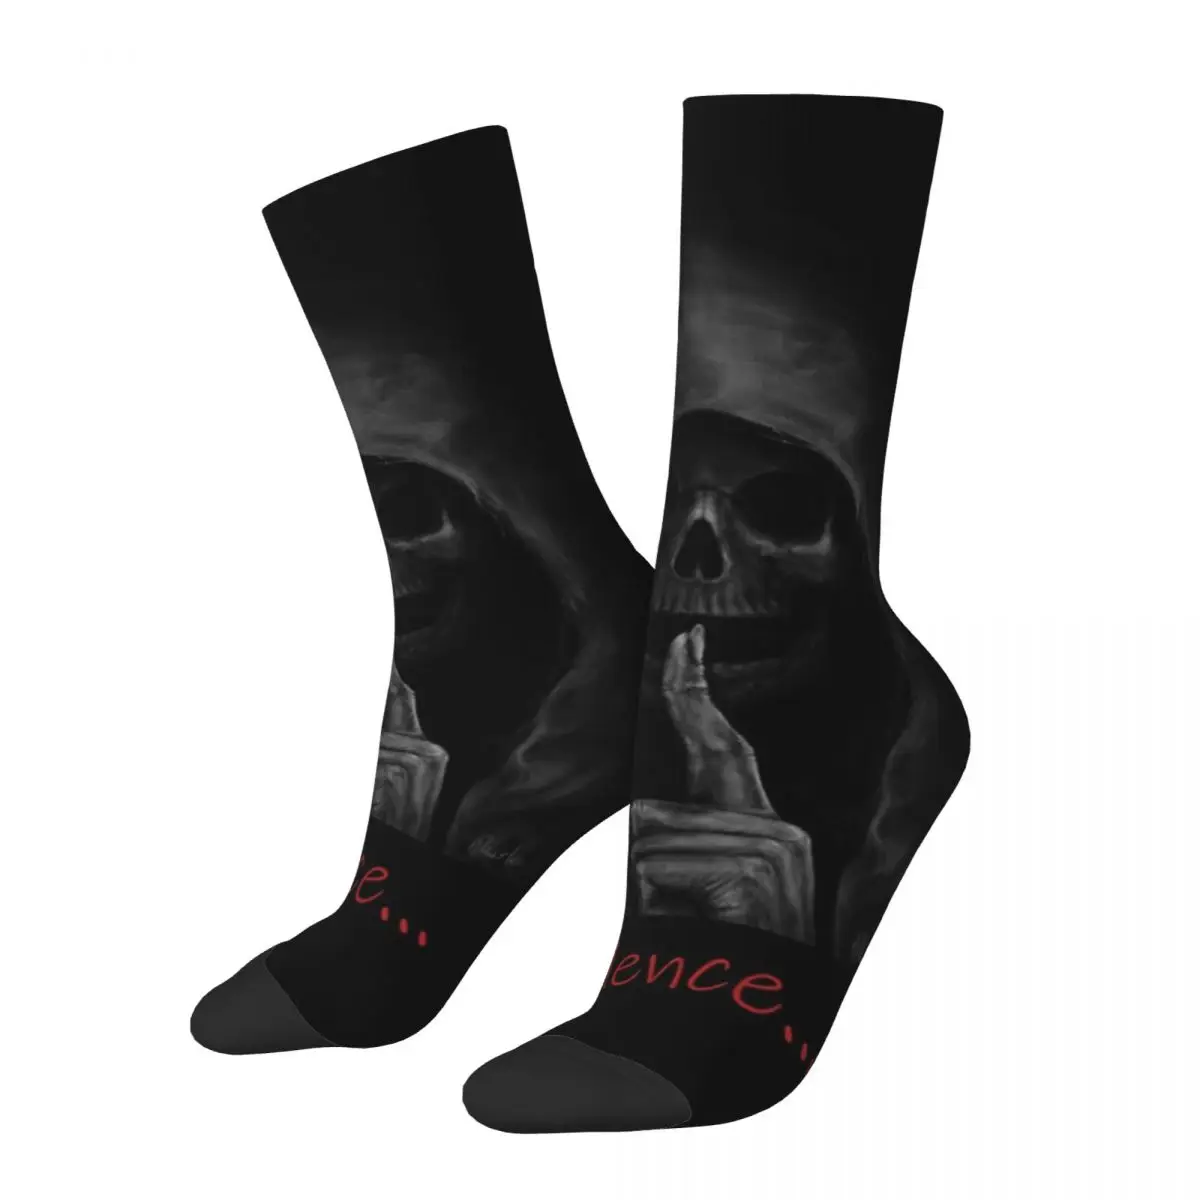 

Funny Crazy Compression Sock for Men Silence Hip Hop Vintage Dead Silence Happy Quality Pattern Printed Boys Crew Sock